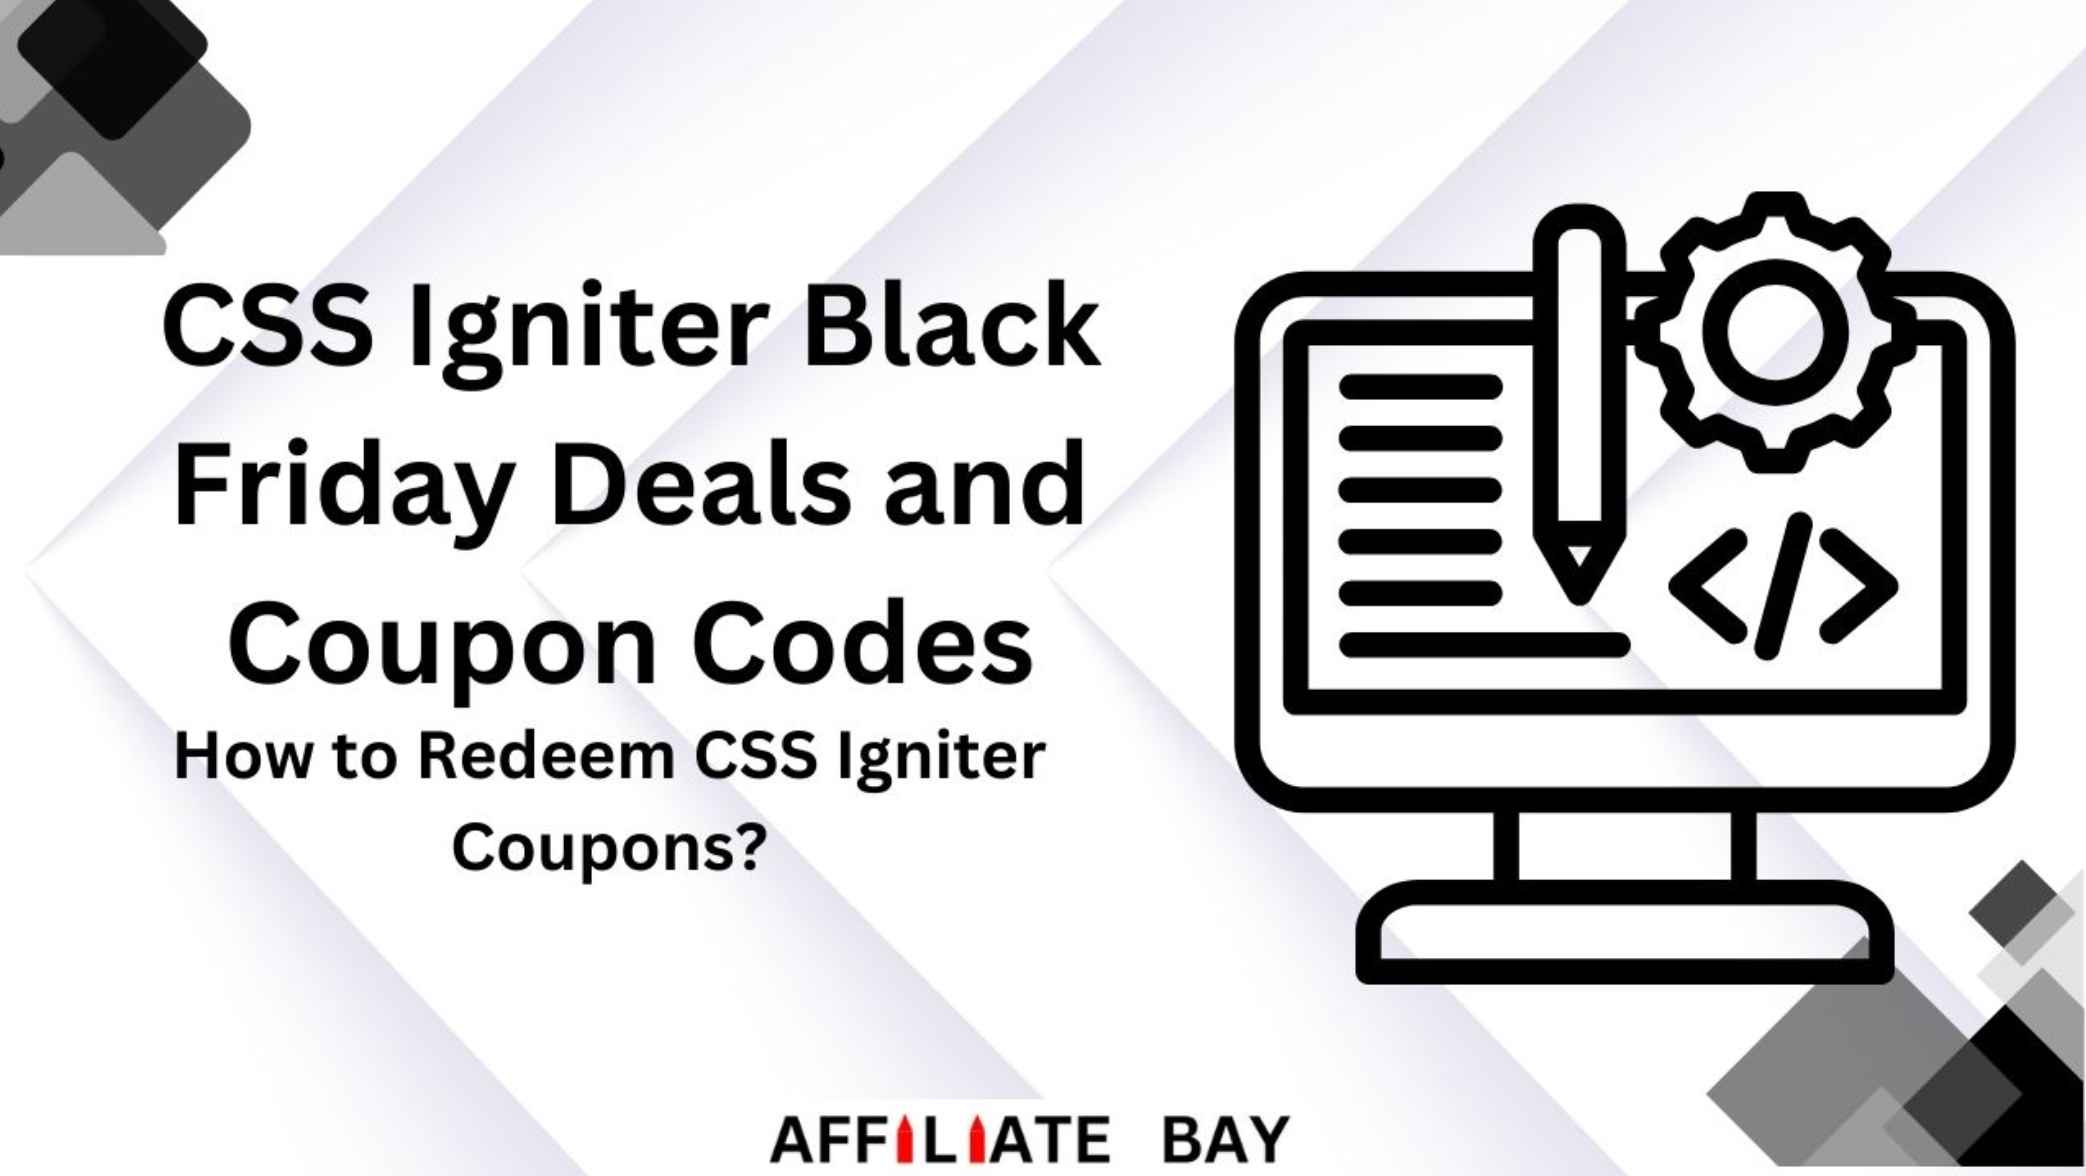 CSS Igniter Black Friday Deals And Coupon Codes